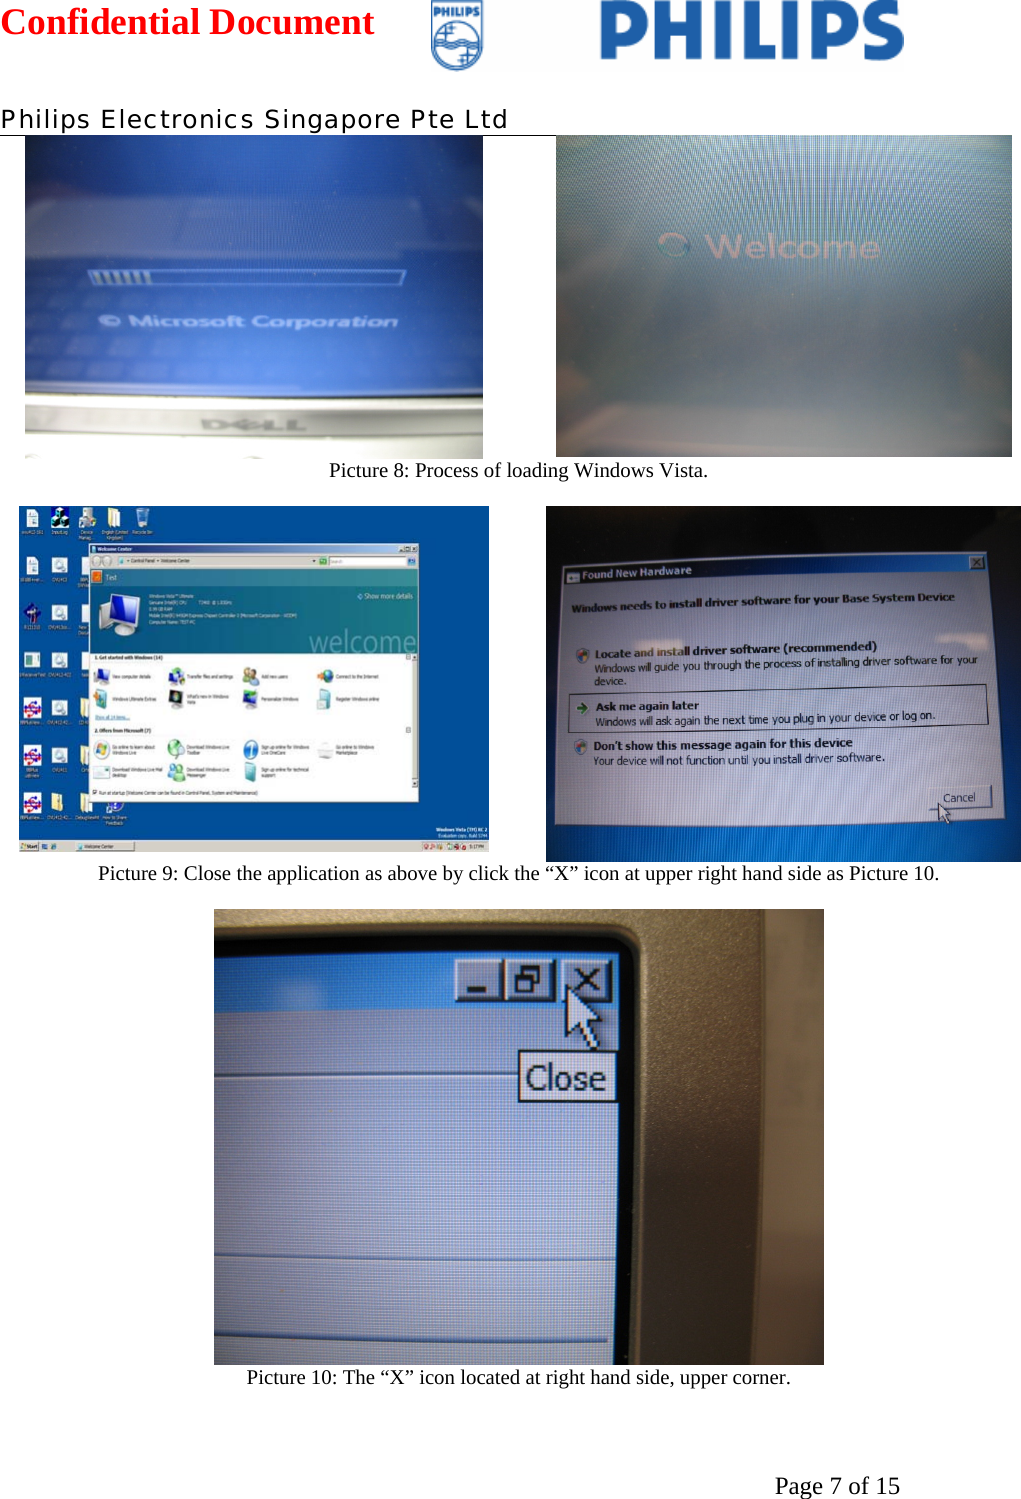 Confidential Document   Philips Electronics Singapore Pte Ltd  Page 7 of 15  Picture 8: Process of loading Windows Vista.    Picture 9: Close the application as above by click the “X” icon at upper right hand side as Picture 10.   Picture 10: The “X” icon located at right hand side, upper corner. 